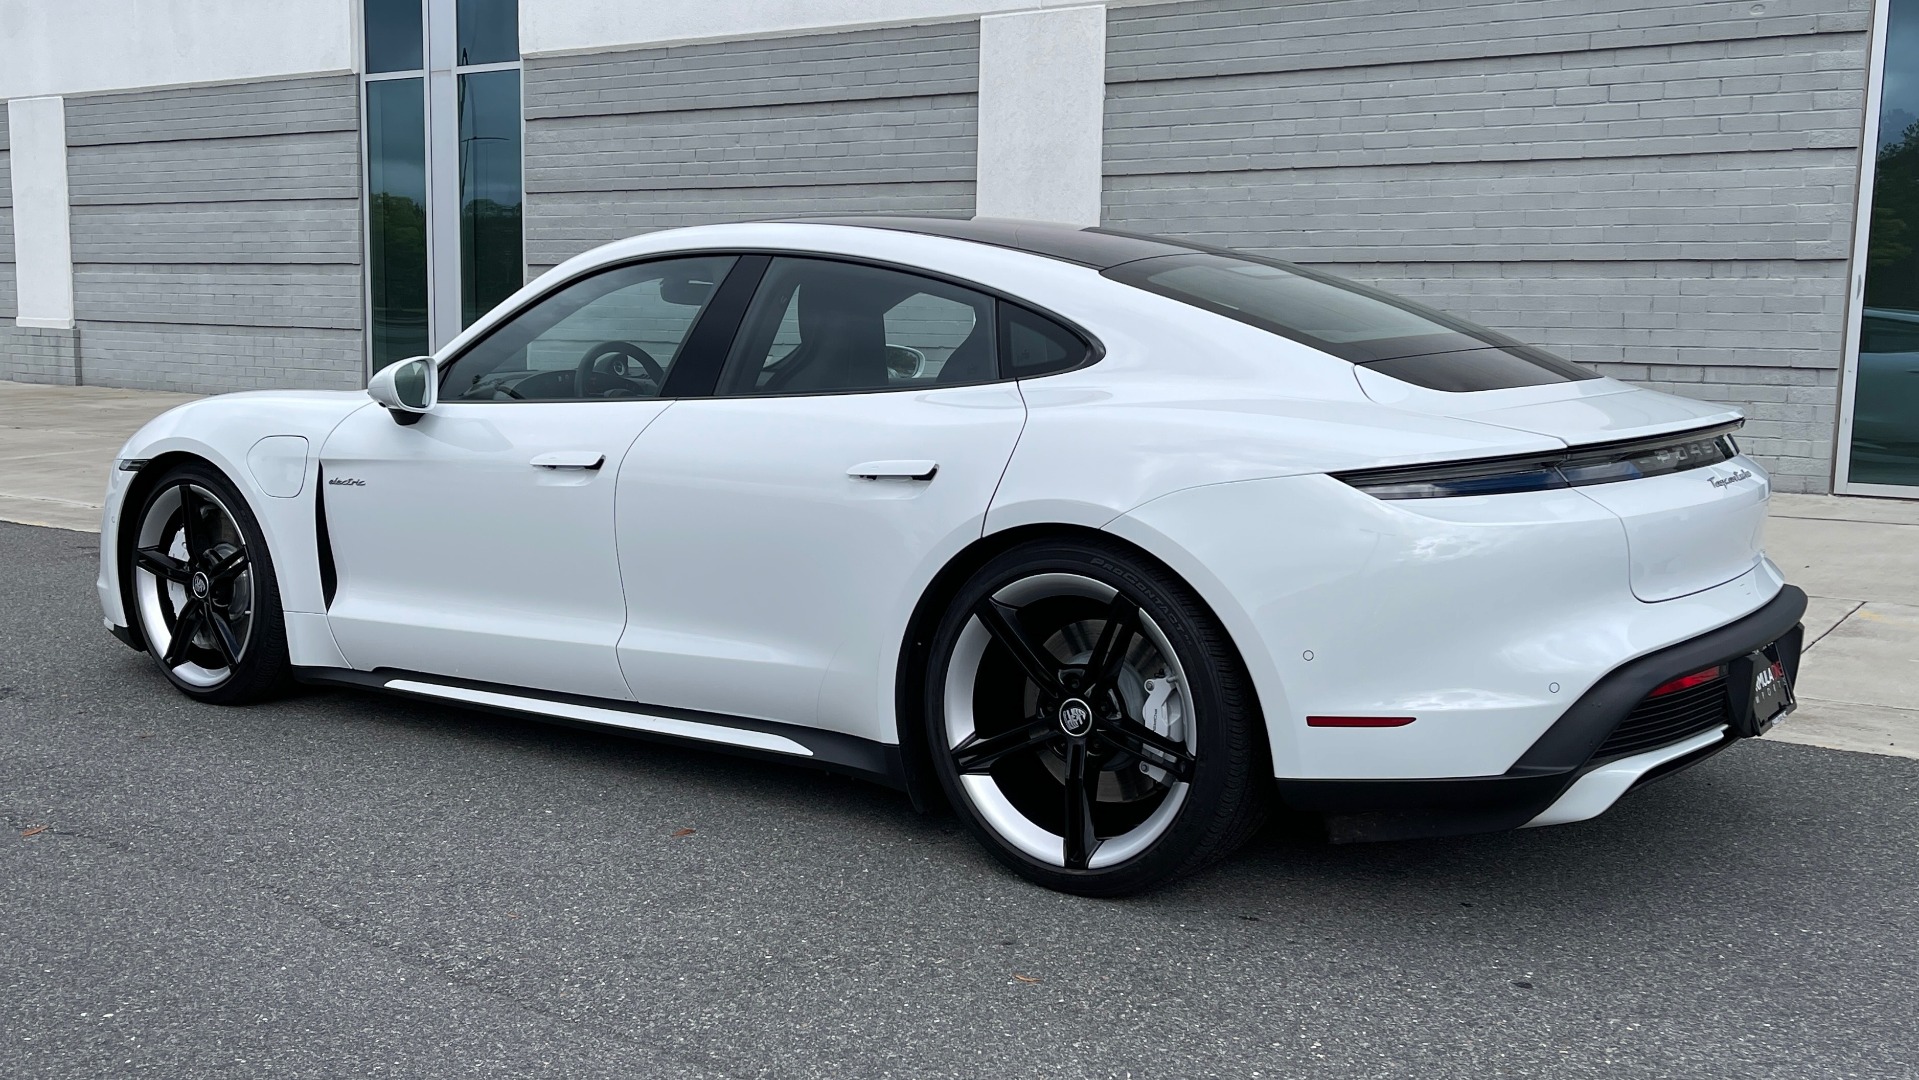 Used 2020 Porsche TAYCAN TURBO SEDAN / AWD / NAV / BOSE / PANO-ROOF / LCA / SURROUND VIEW for sale Sold at Formula Imports in Charlotte NC 28227 4